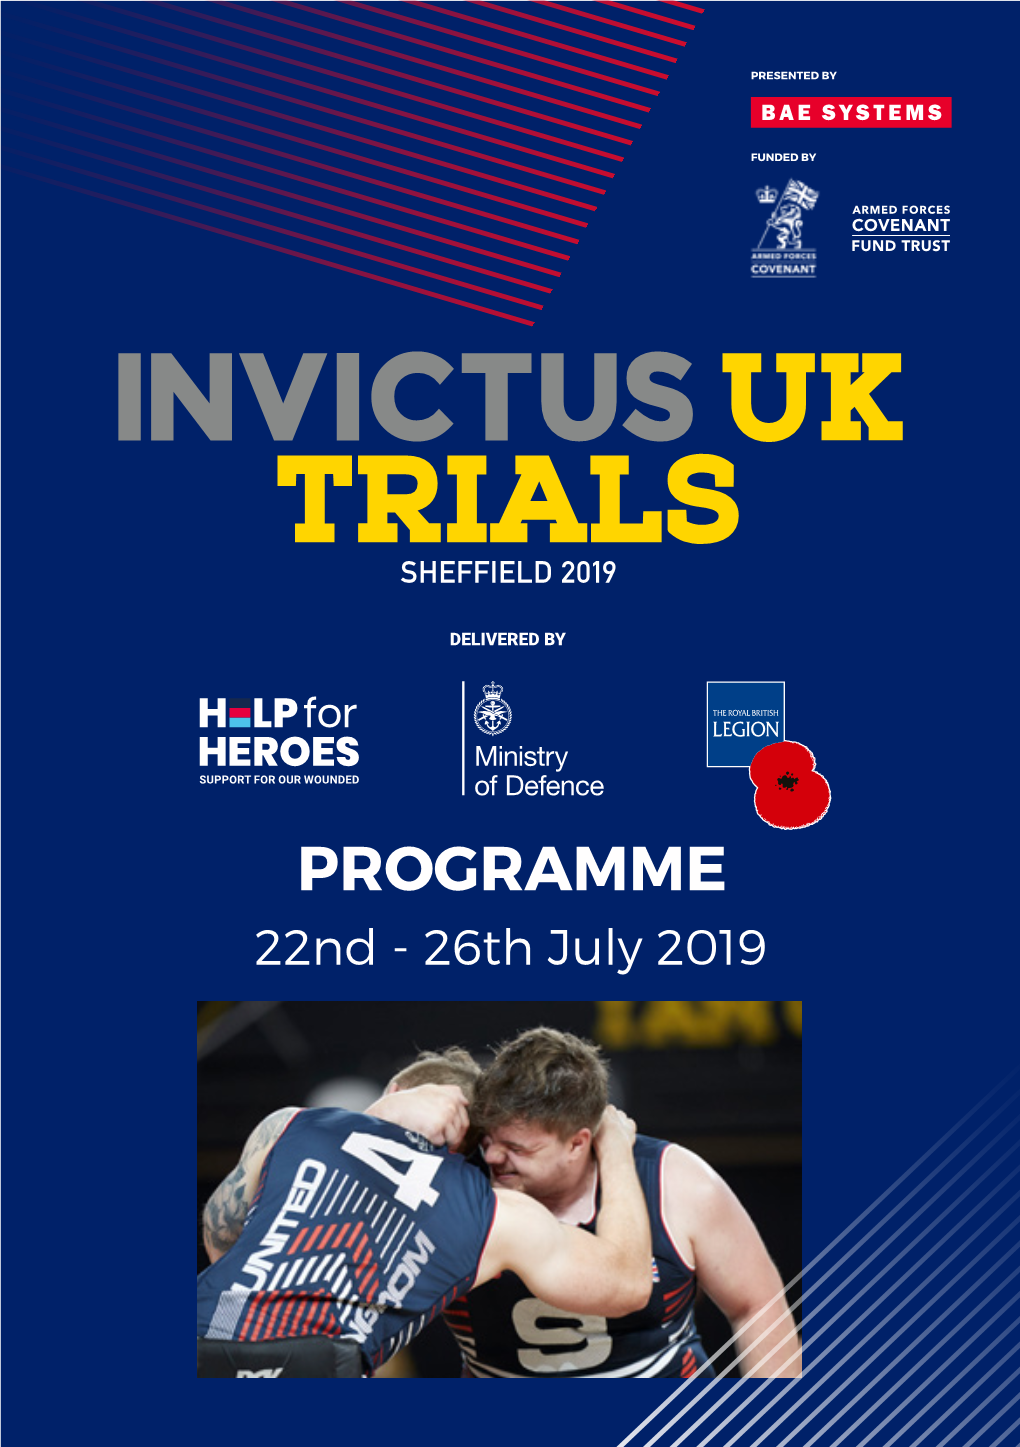 PROGRAMME 22Nd - 26Th July 2019 Welcome to the Daily Schedule Invictus UK Trials